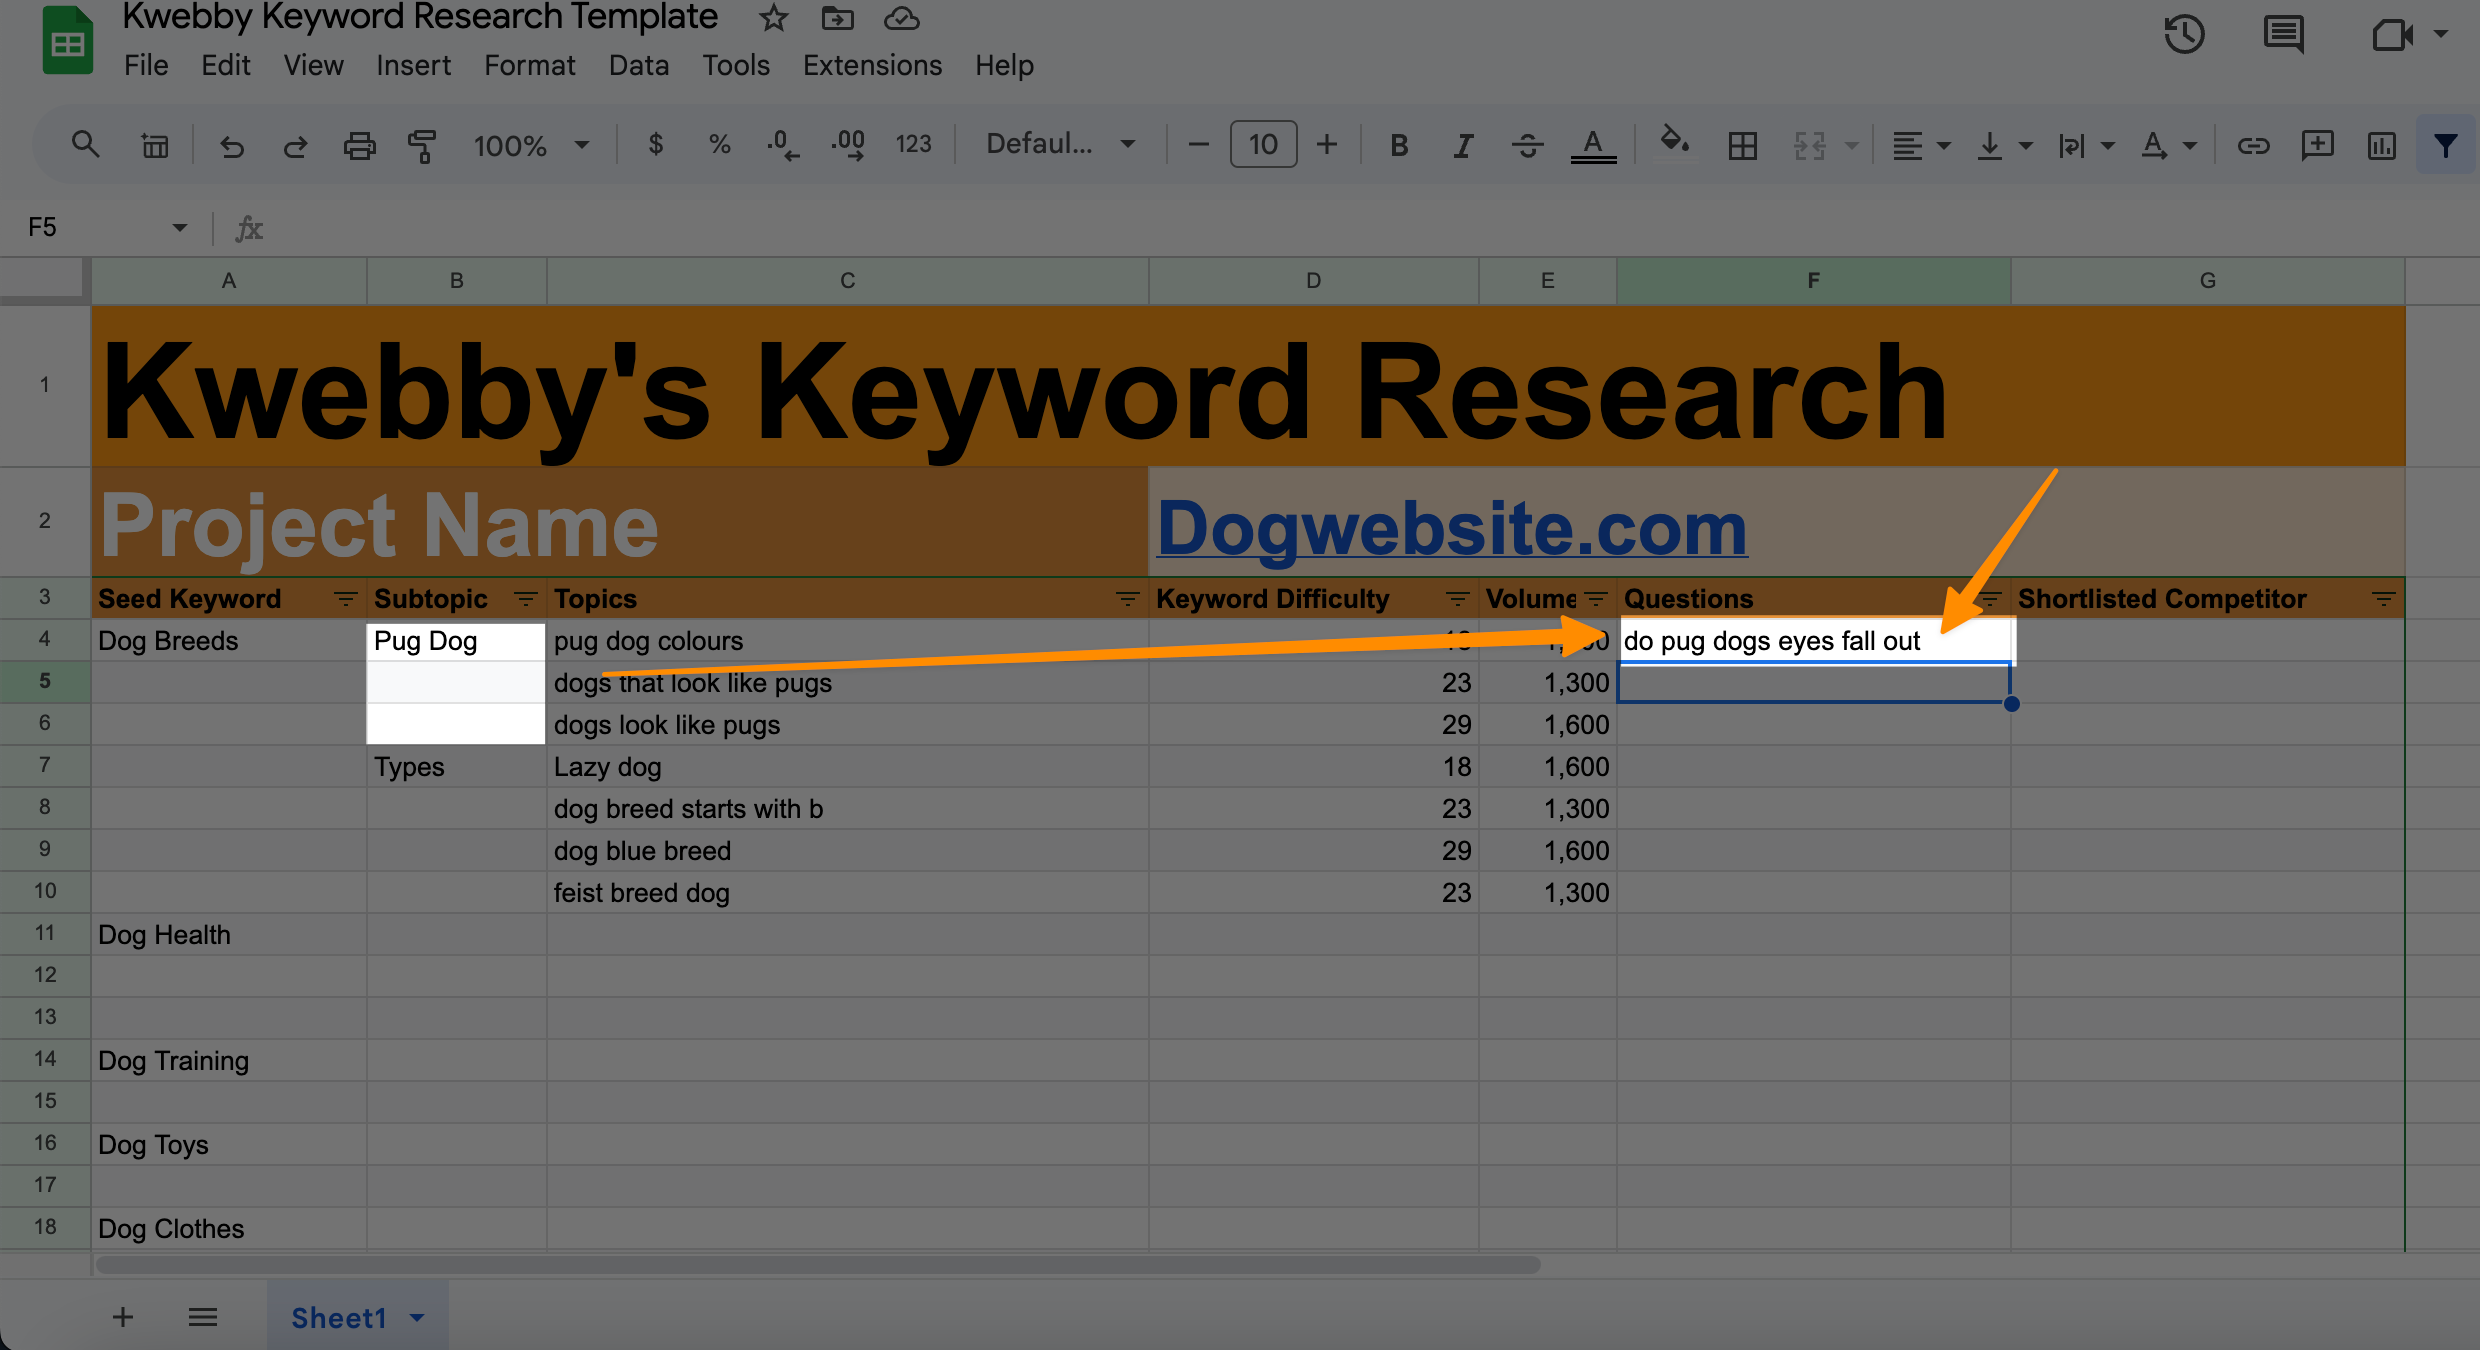 How to do Keyword Research for New Sites to Get 100k Traffic (Template Inside) 10